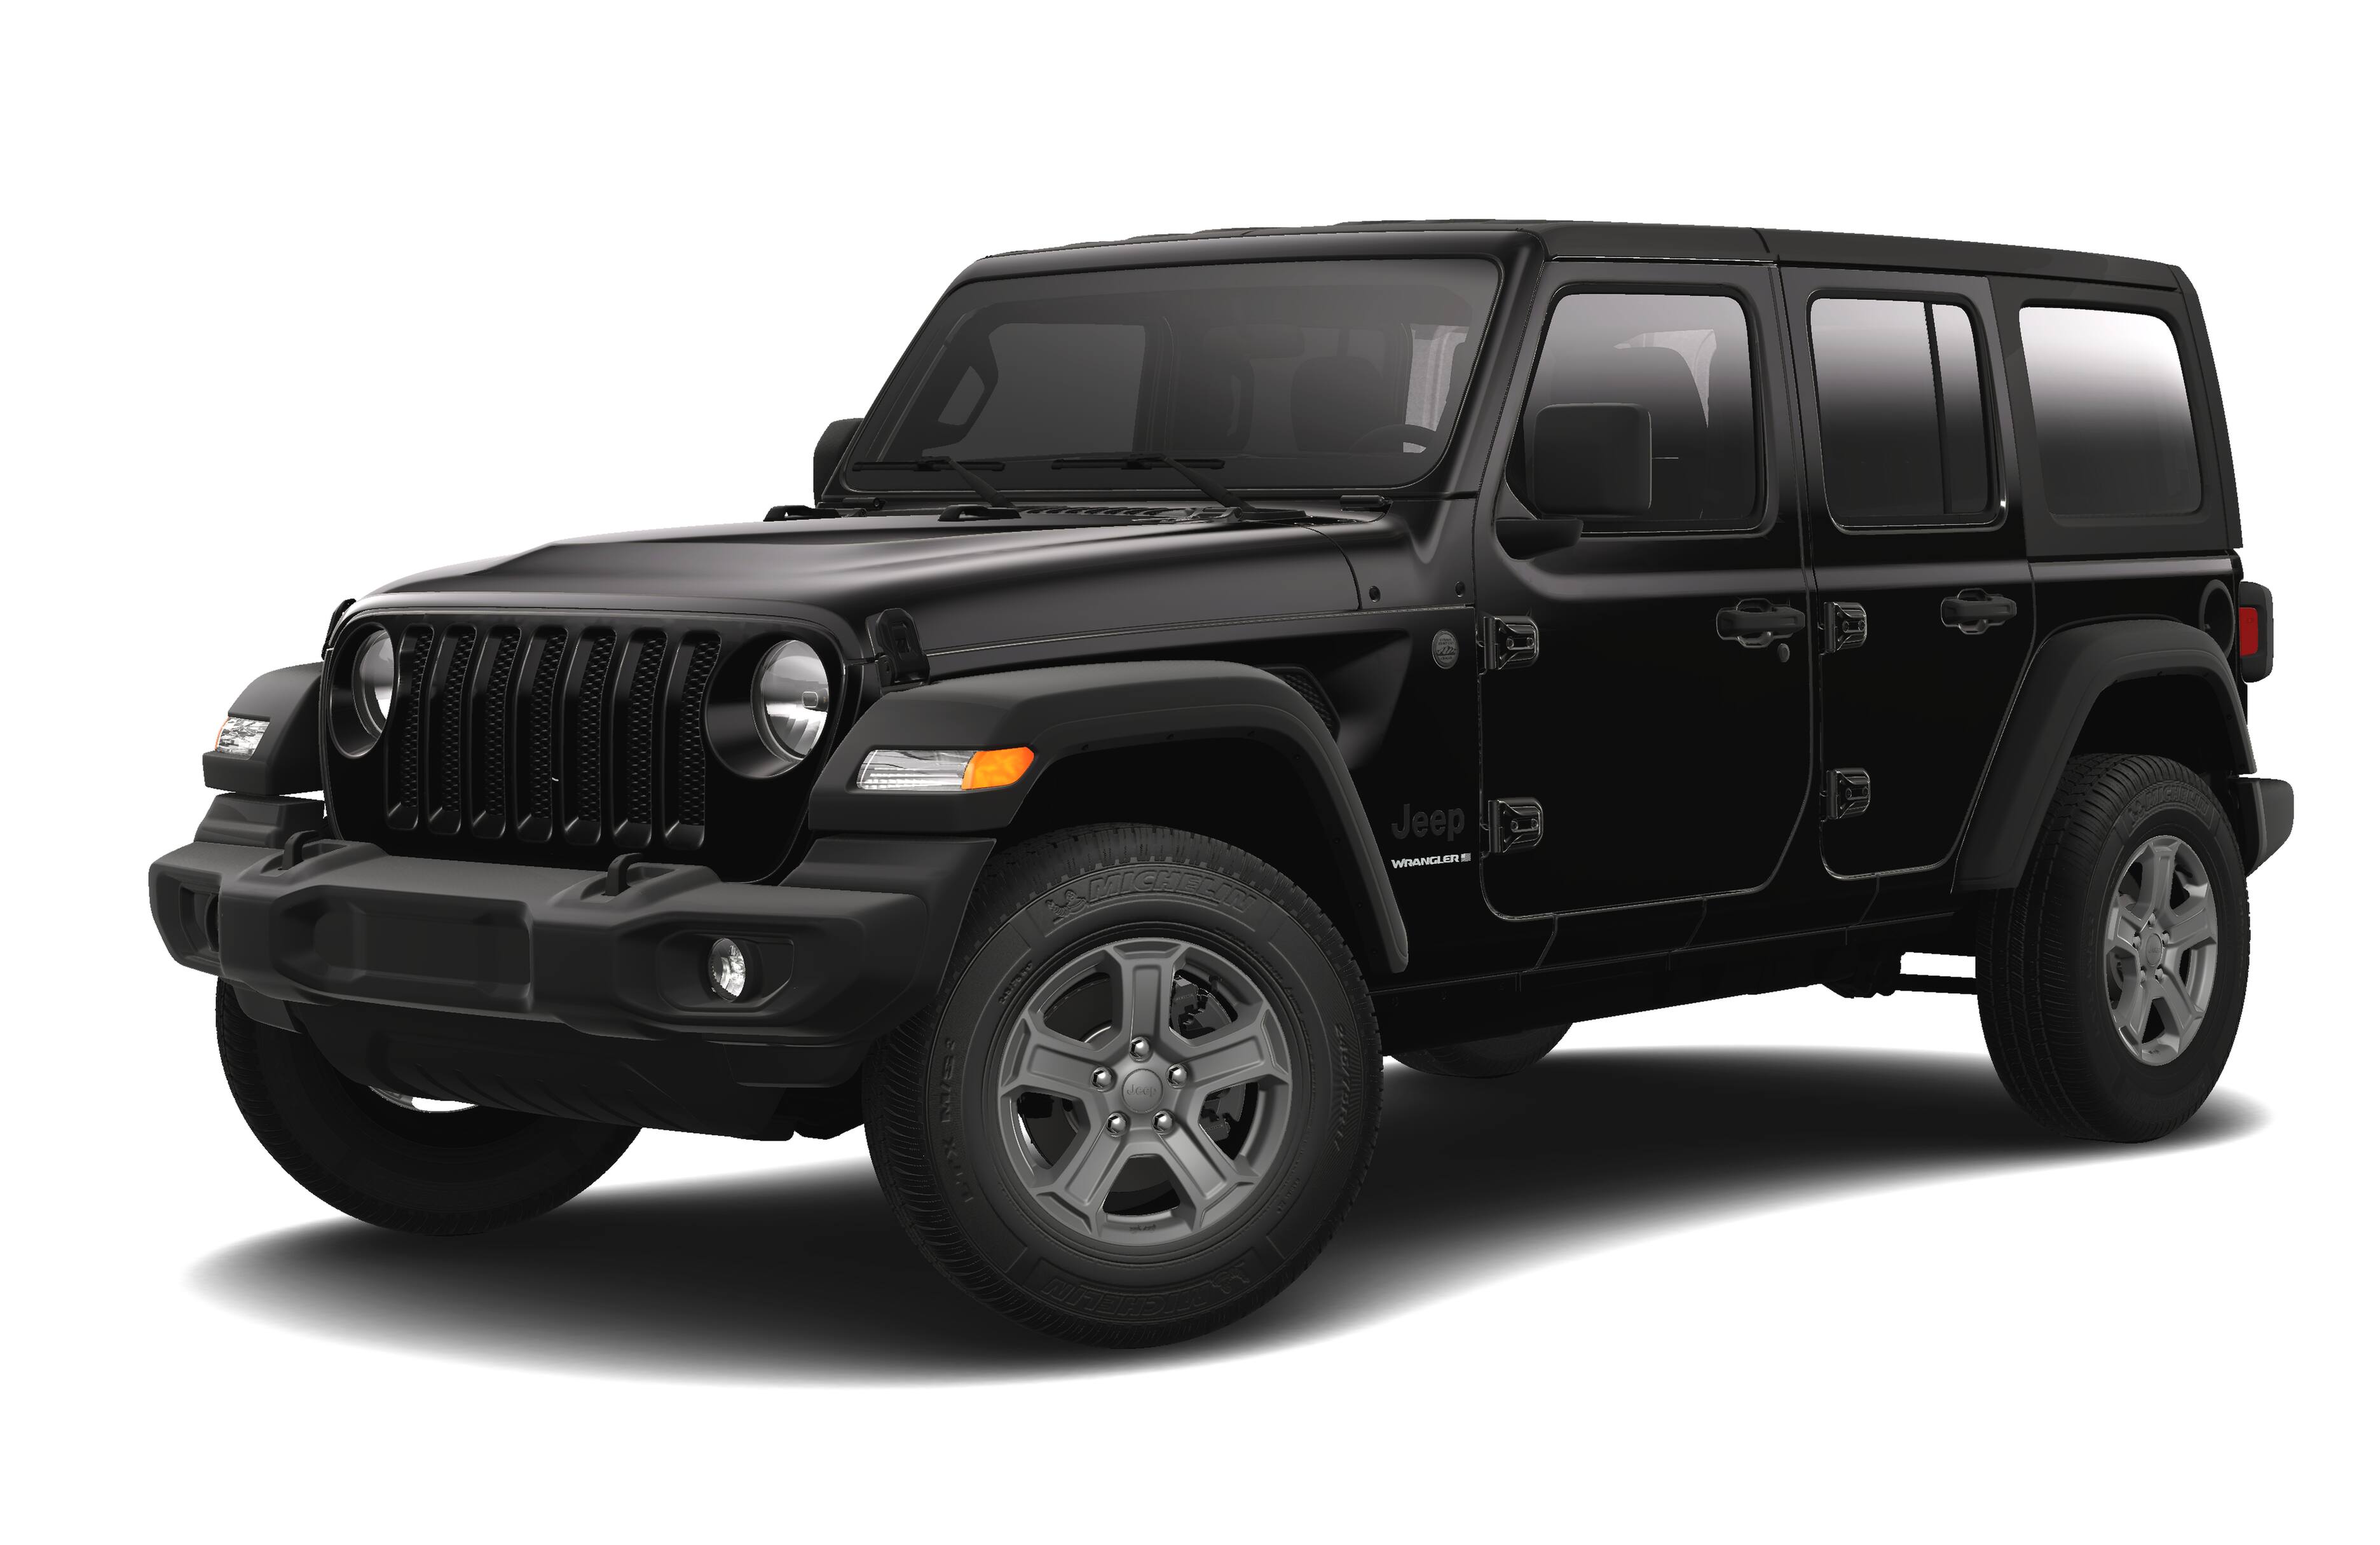 Jeep Wrangler Lease Deals and Sale Prices in MA | Central Chrysler Dodge  Jeep Ram of Raynham